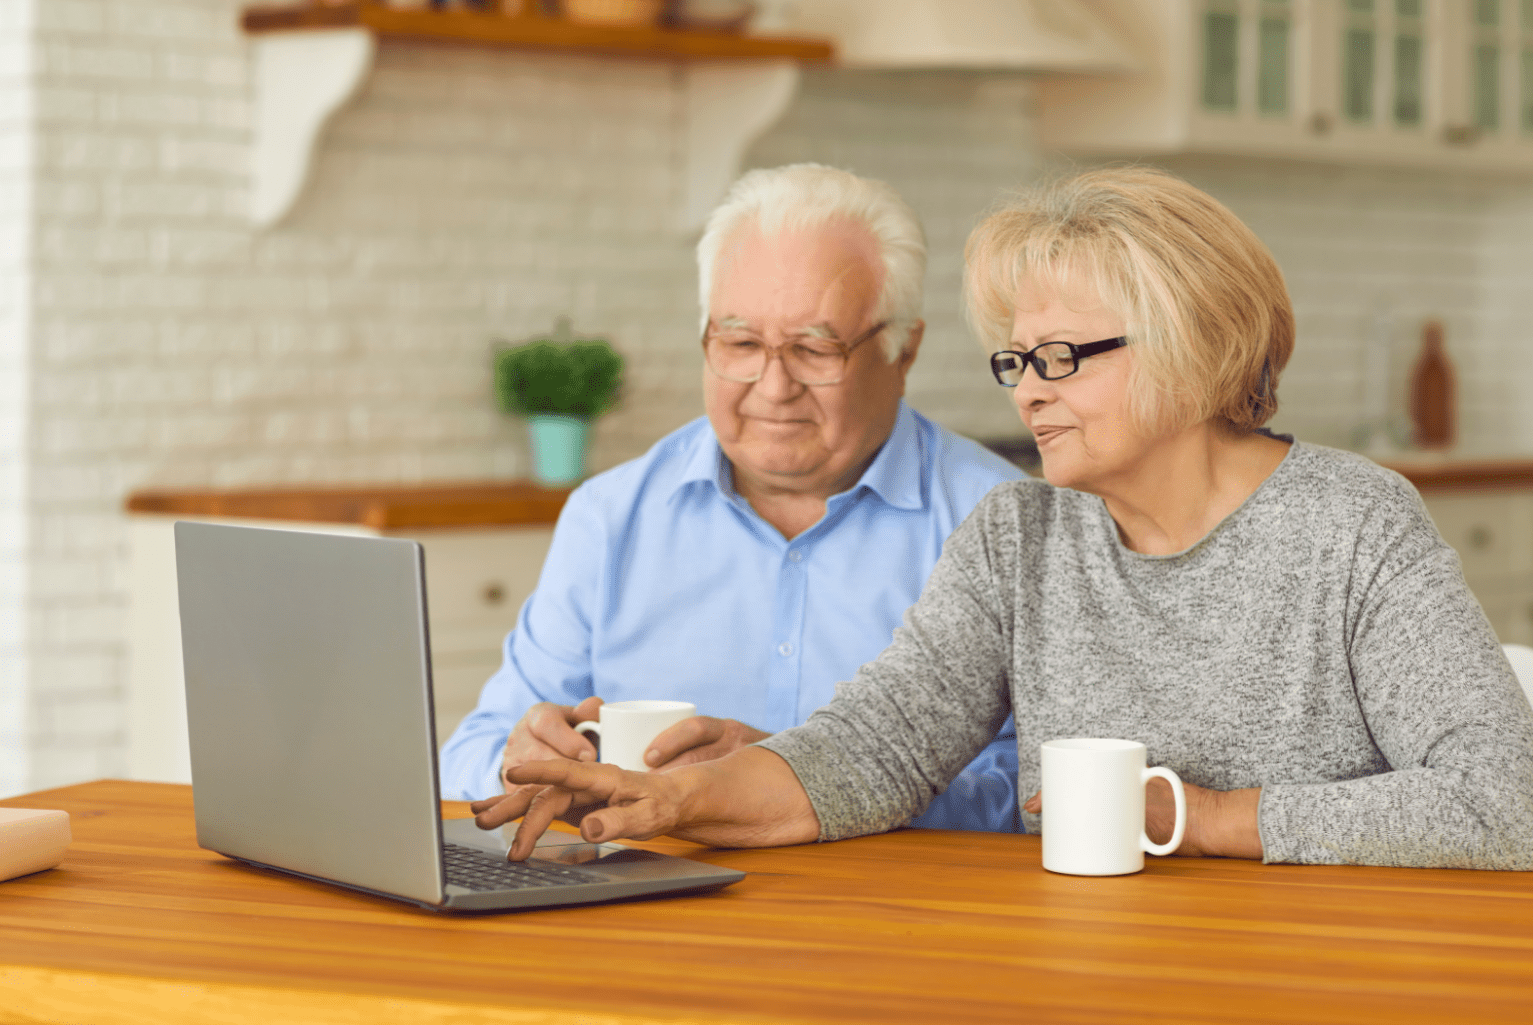 Top 5 Elder Fraud Internet Scams That Seniors Should Be Aware Of This Holiday Season